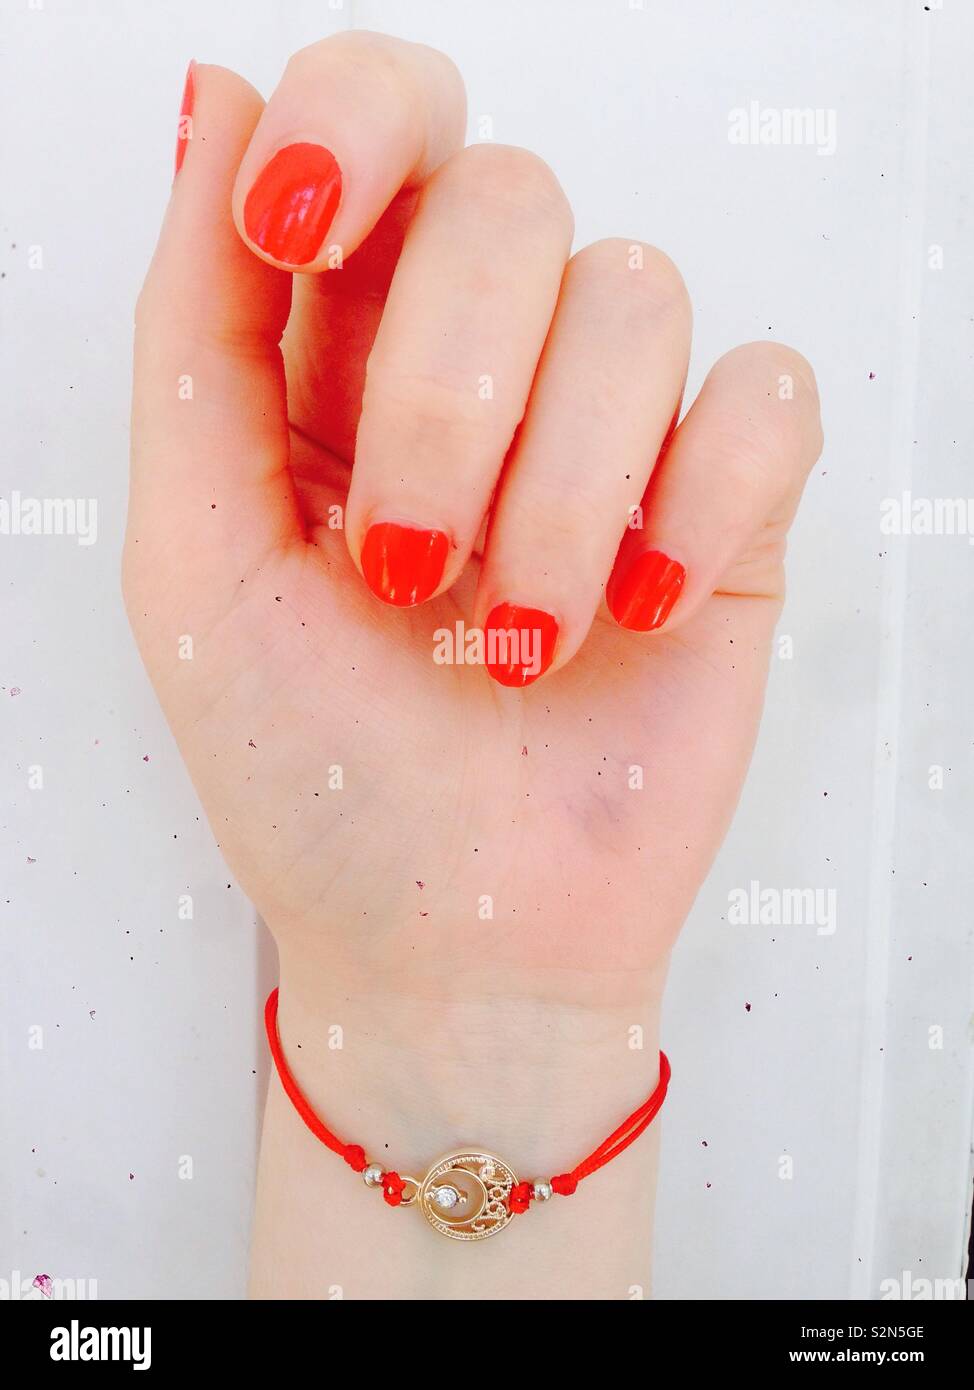 Girls hand with red nails and red beautiful jewelry Stock Photo ...